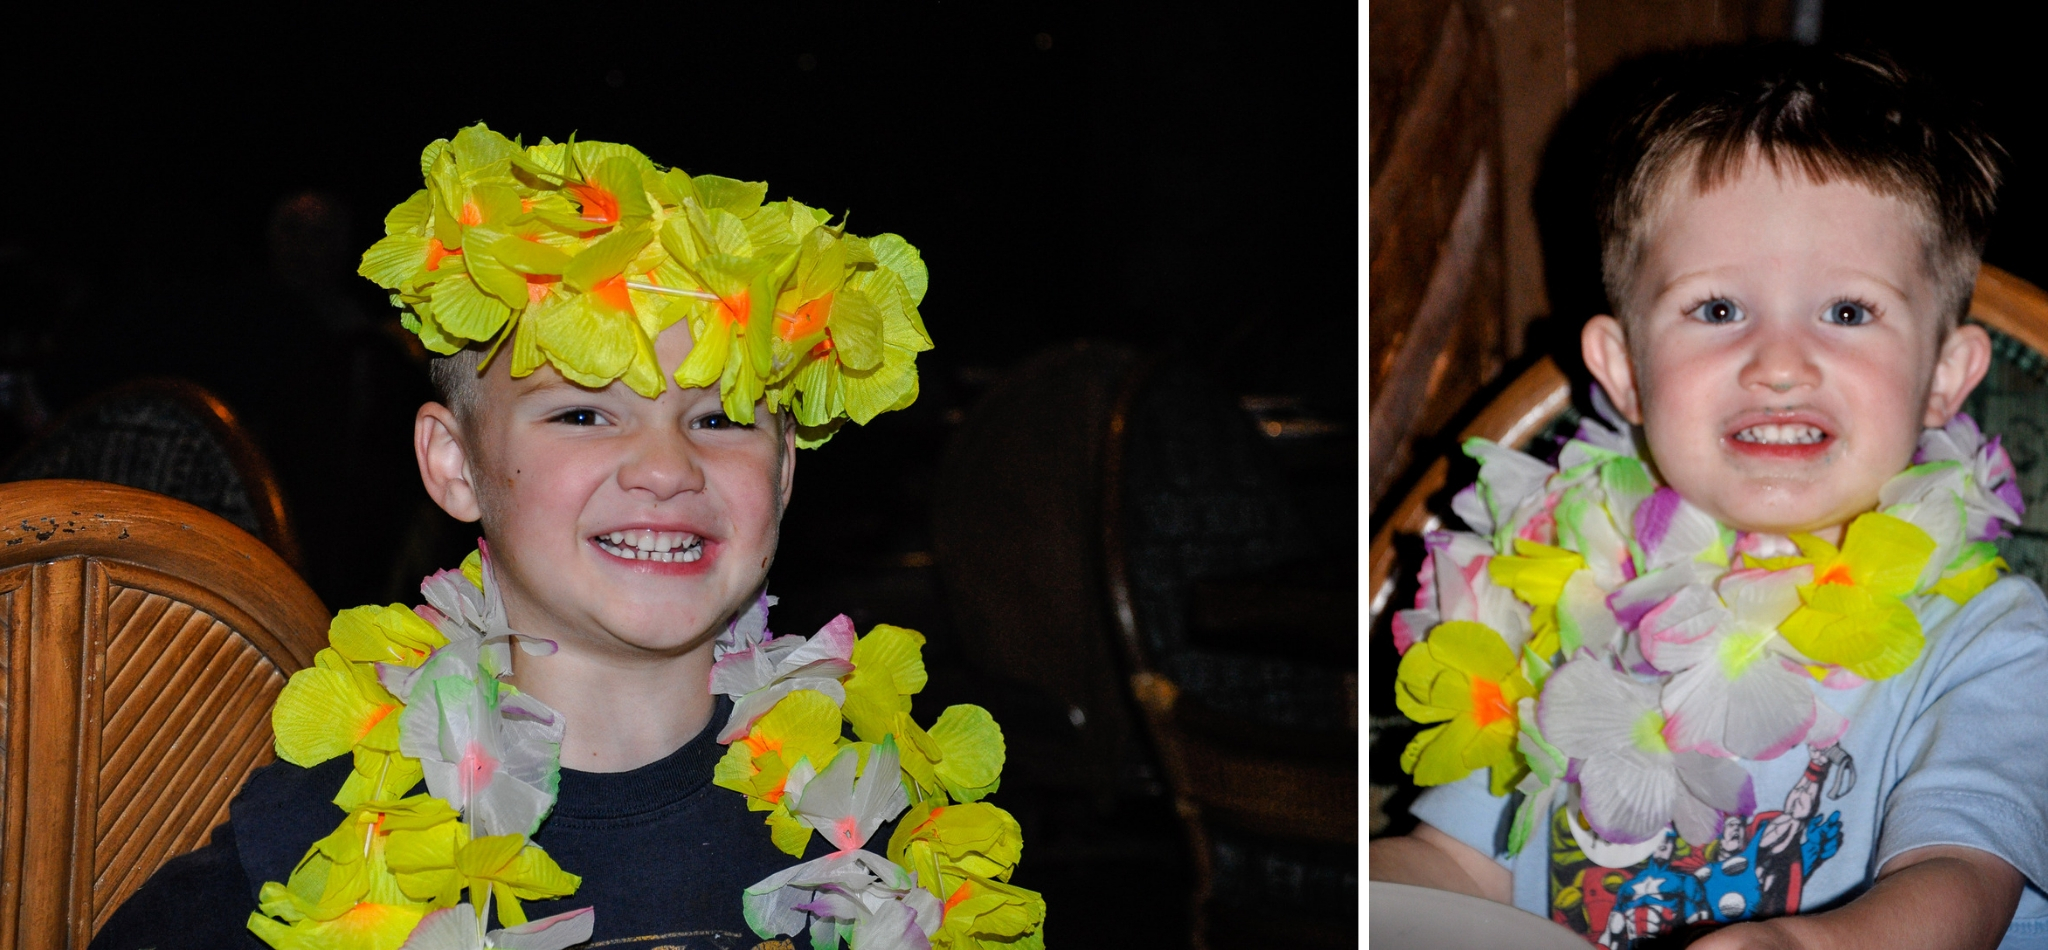 Cute kids wrapped in leis.